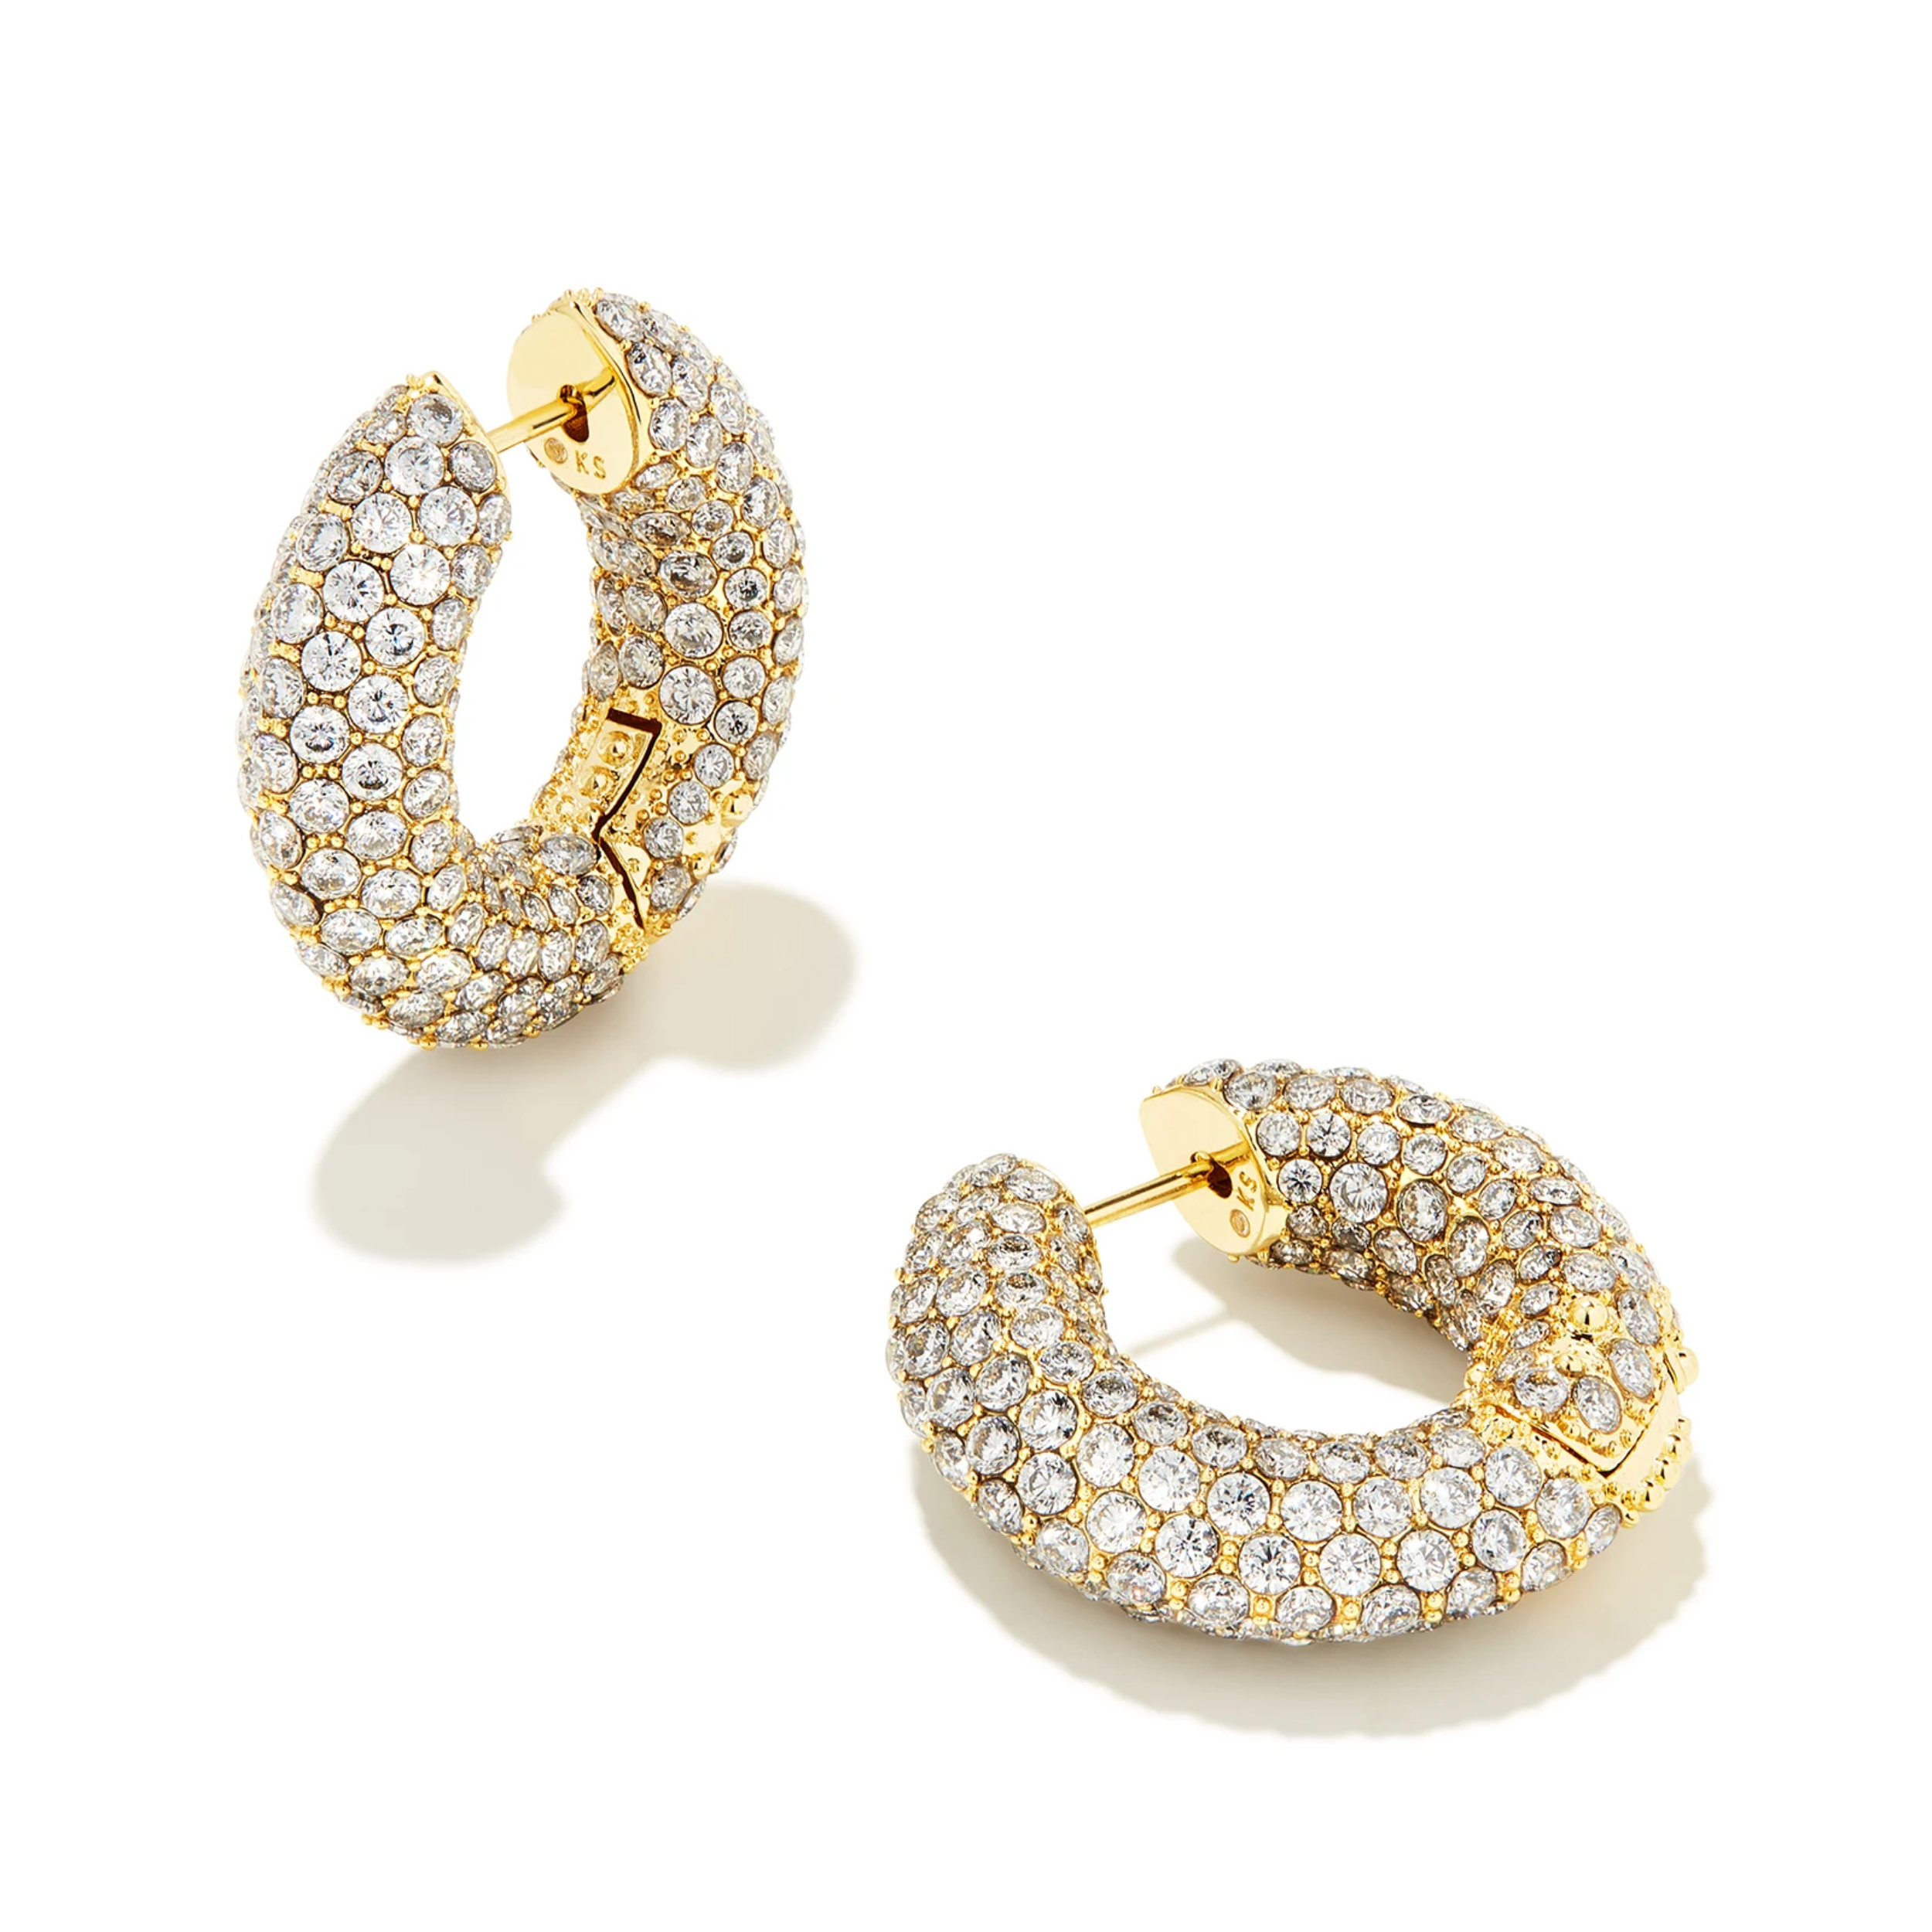 These Mikki Pave Gold Hoop Earrings in White by Kendra Scott are pictured on a white background.